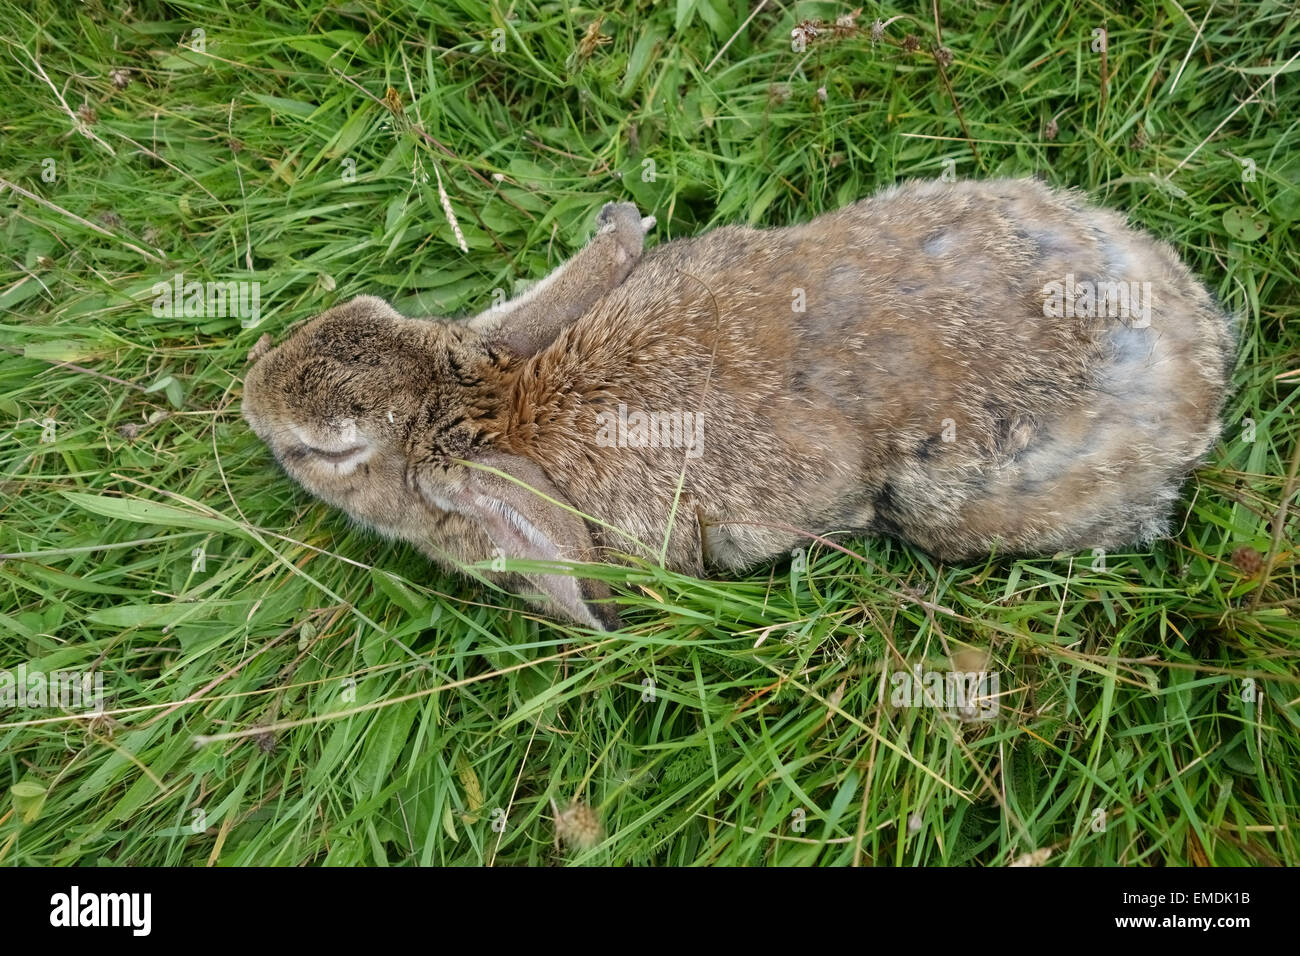 A European rabbit severely affected by myxomatosis inert with swollen eyes Stock Photo